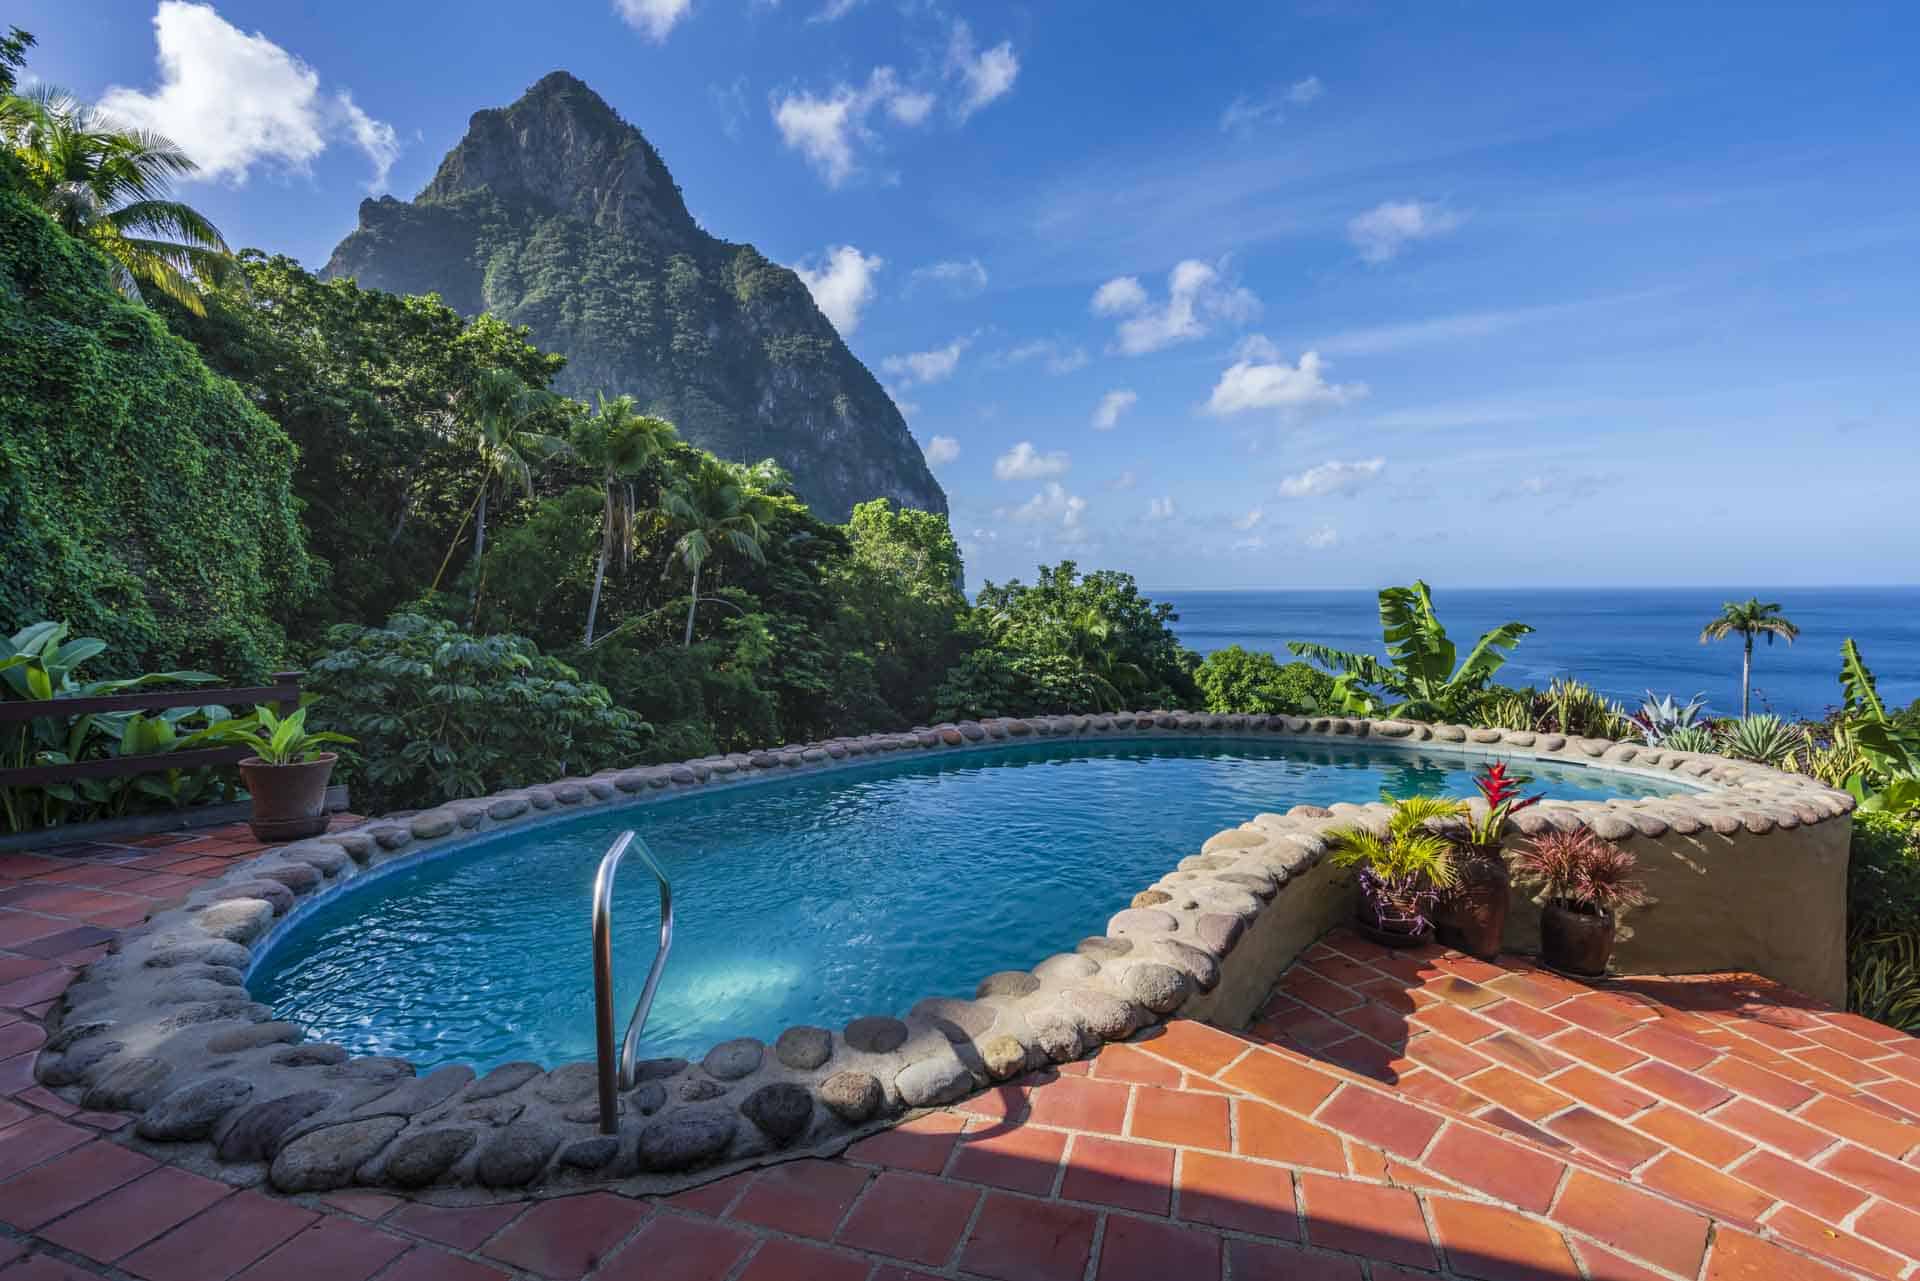 Where to stay in Saint Lucia in the South